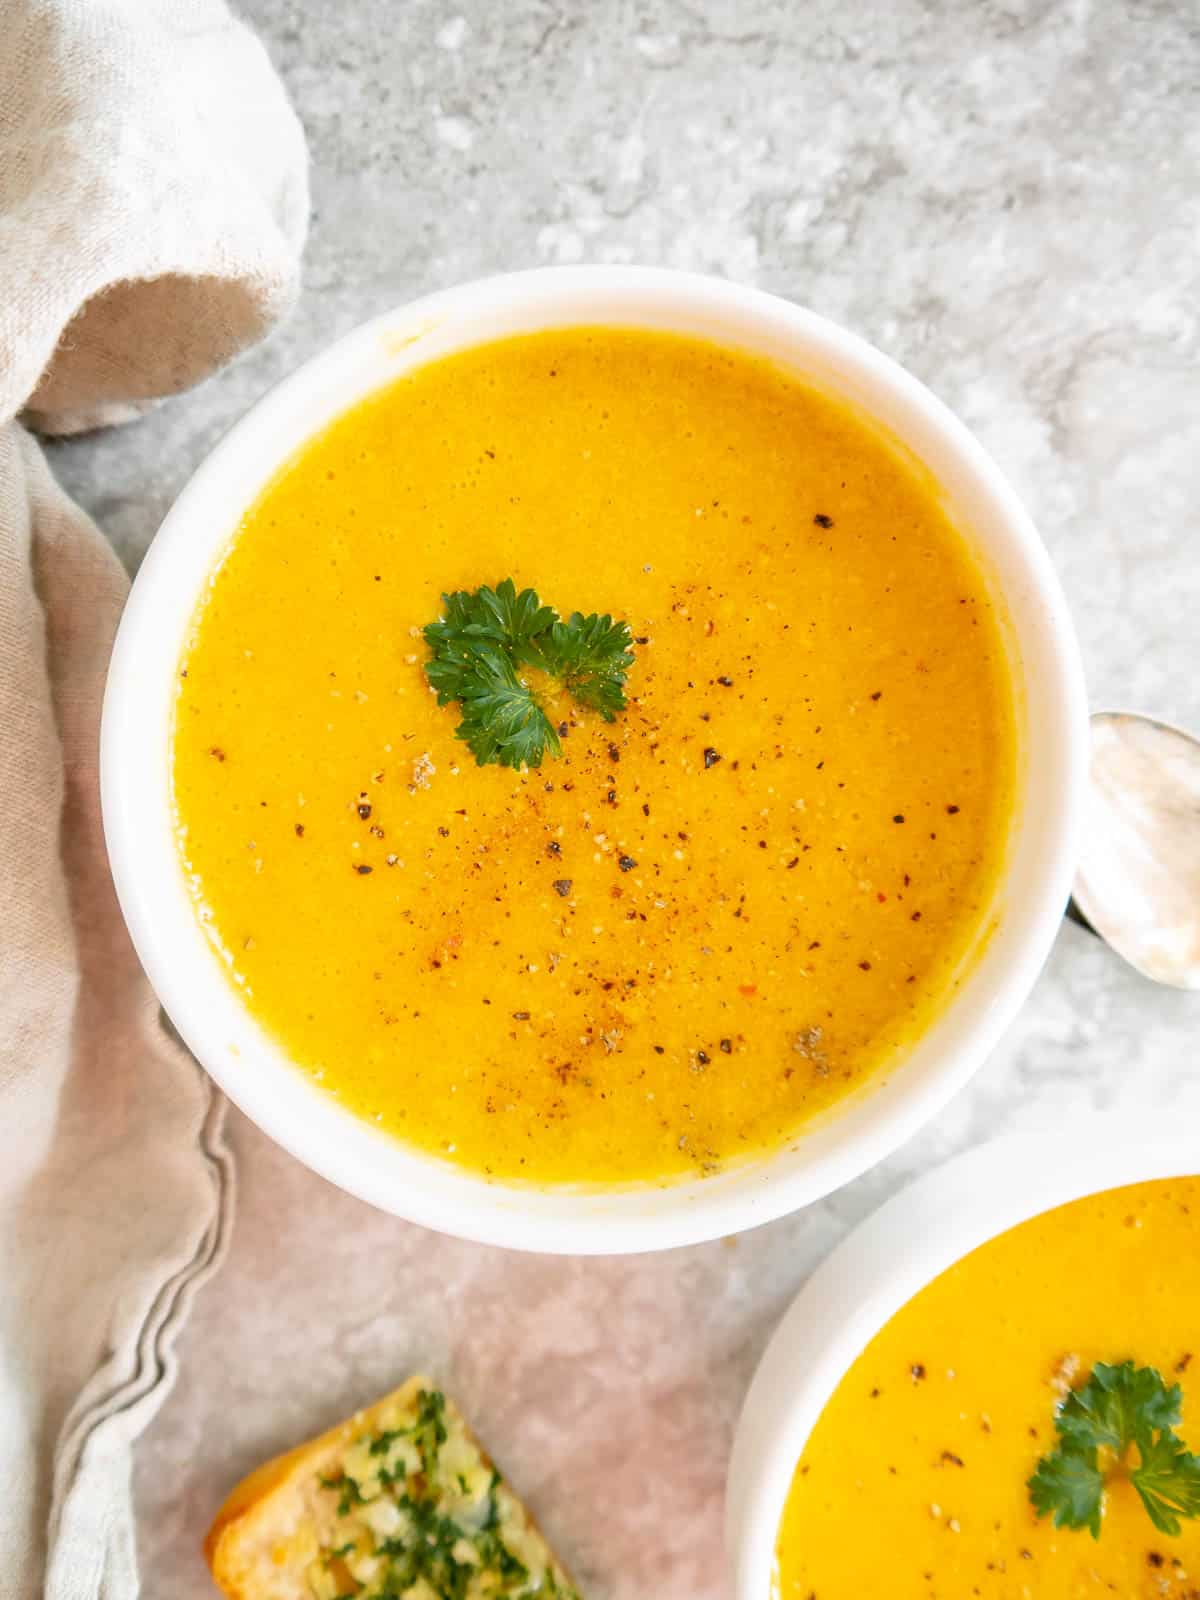 Roasted butternut squash soup in two bowls with parsley on top.